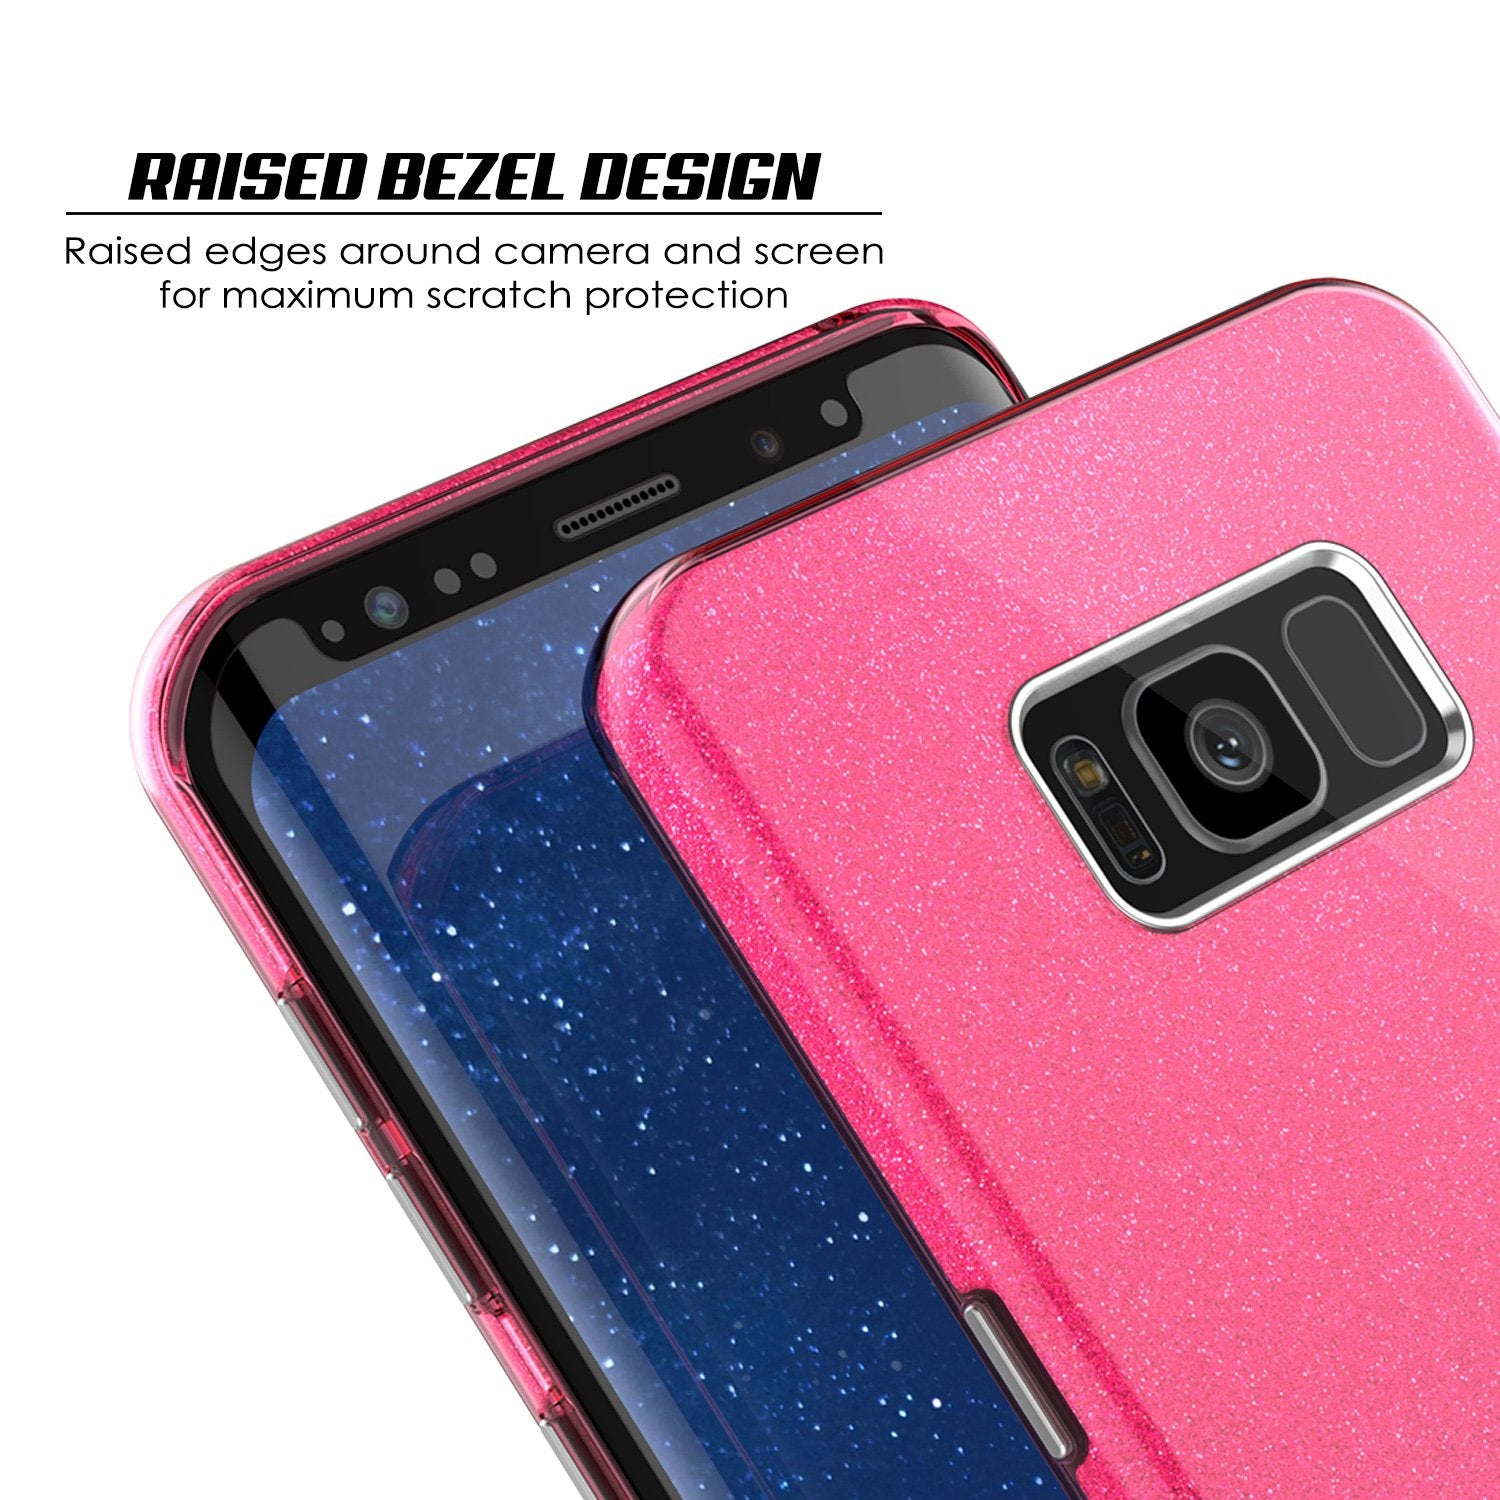 Galaxy S8 Case, Punkcase Galactic 2.0 Series Armor Pink Cover